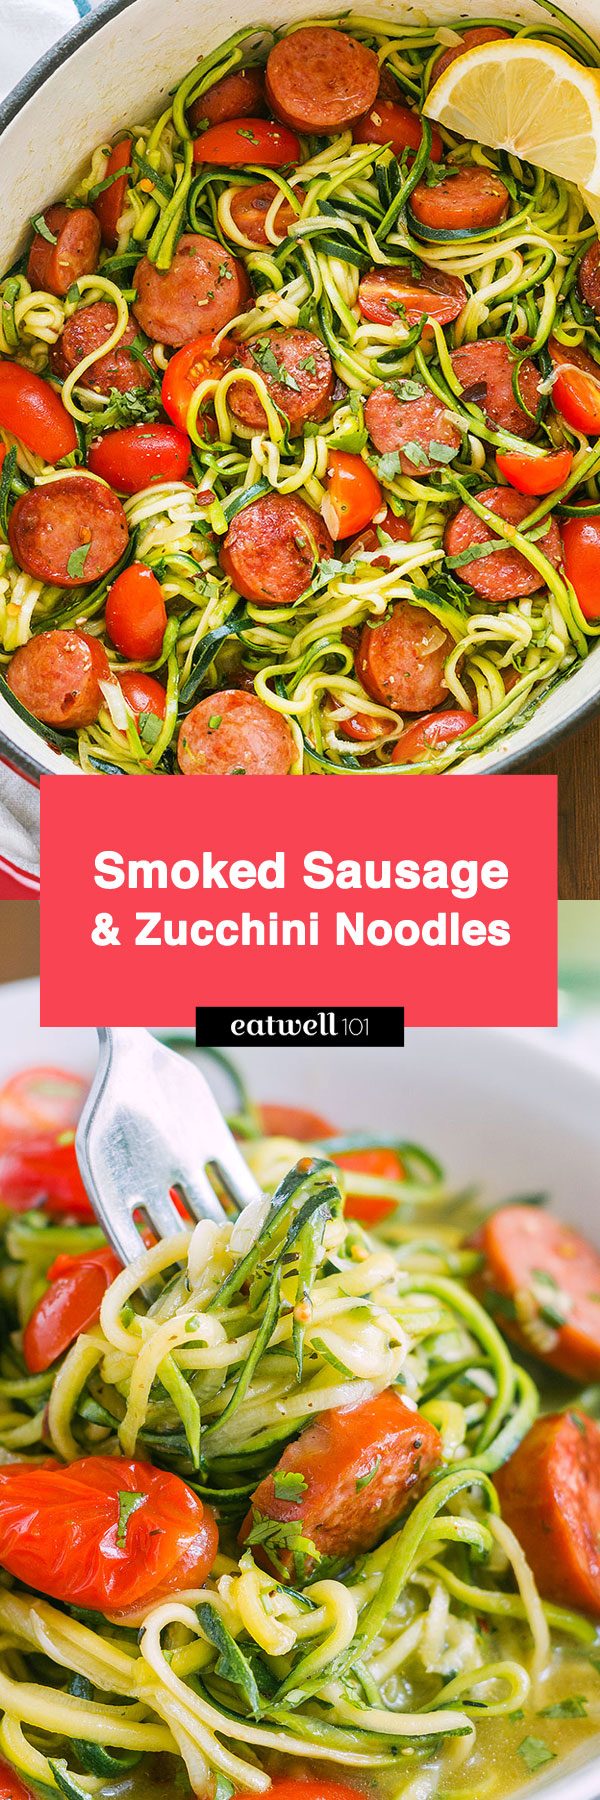 One-Pot Smoked Sausage and Zucchini Noodles — A quick and hearty meal on it’s own, ideal if you're on a low-carb or paleo diet. 